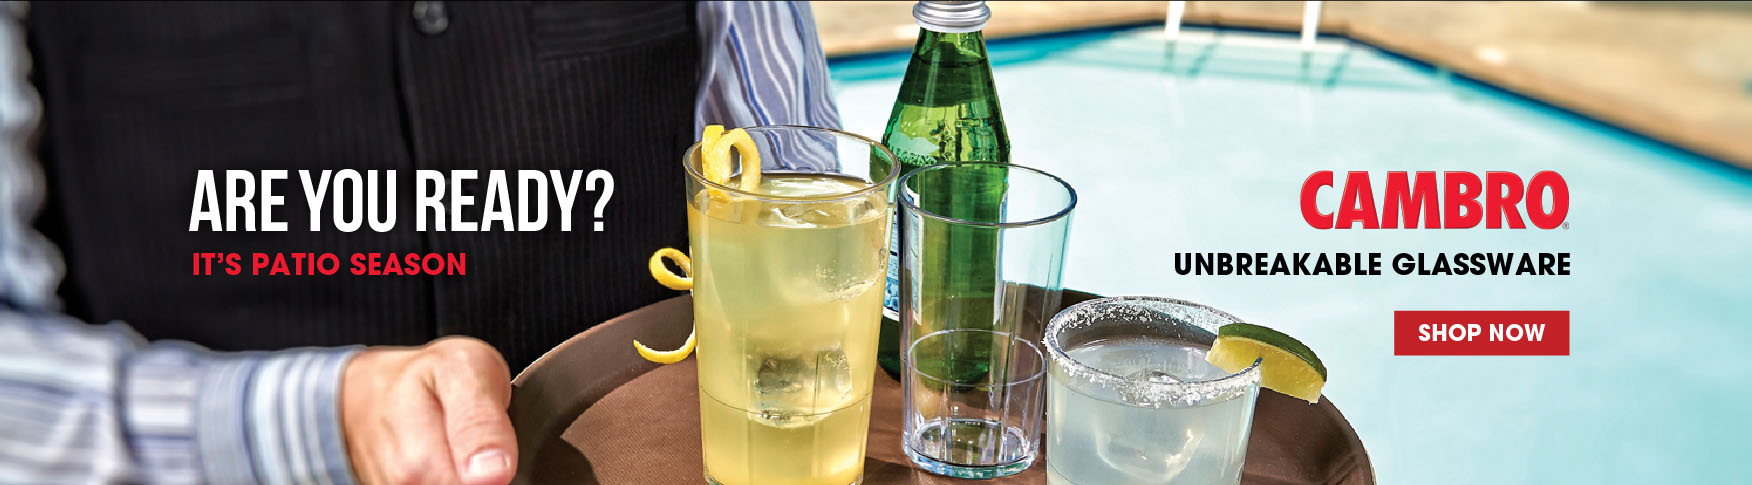 Cambro drinkware is perfect for the upcoming patio season with it's amazing durability!